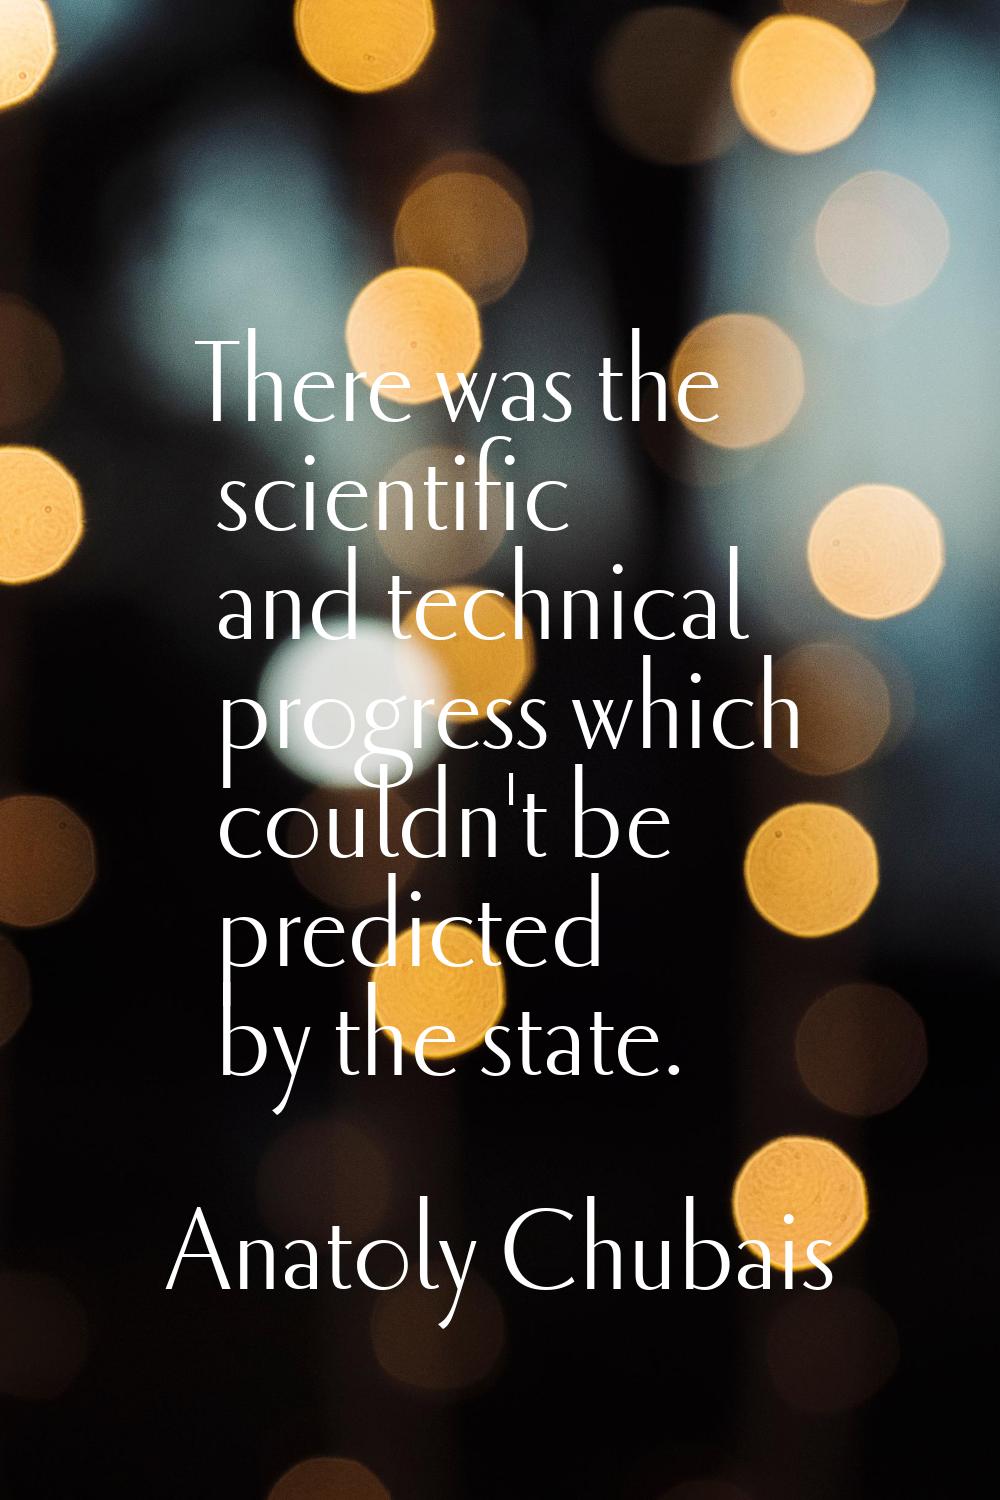 There was the scientific and technical progress which couldn't be predicted by the state.